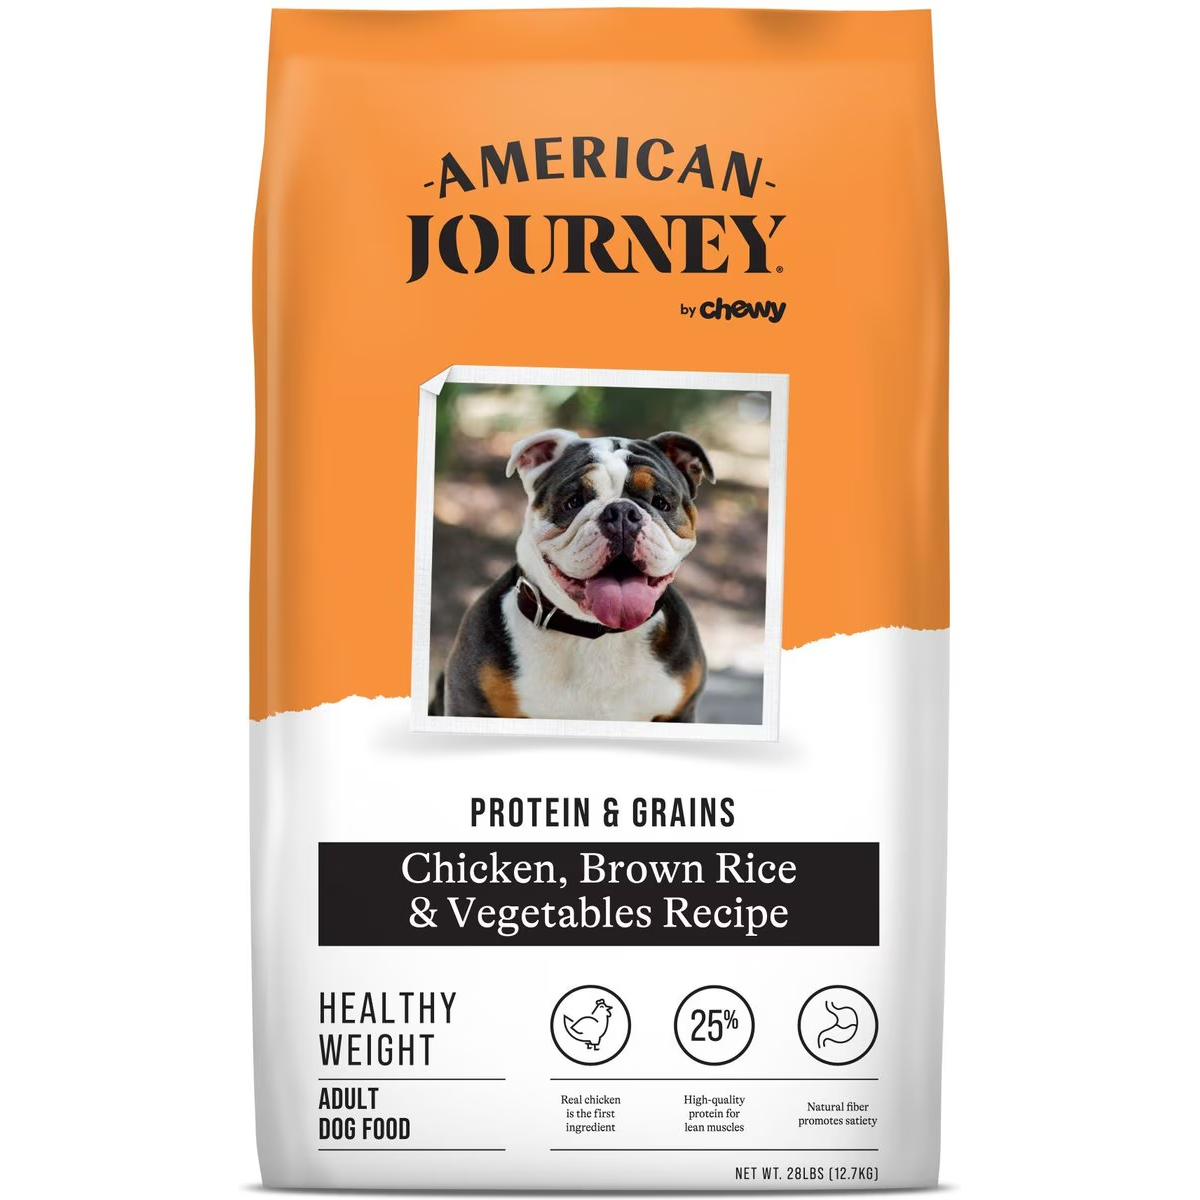 American Journey Protein & Grains Healthy Weight Chicken, Brown Rice & Vegetables Recipe Dry Dog Food 